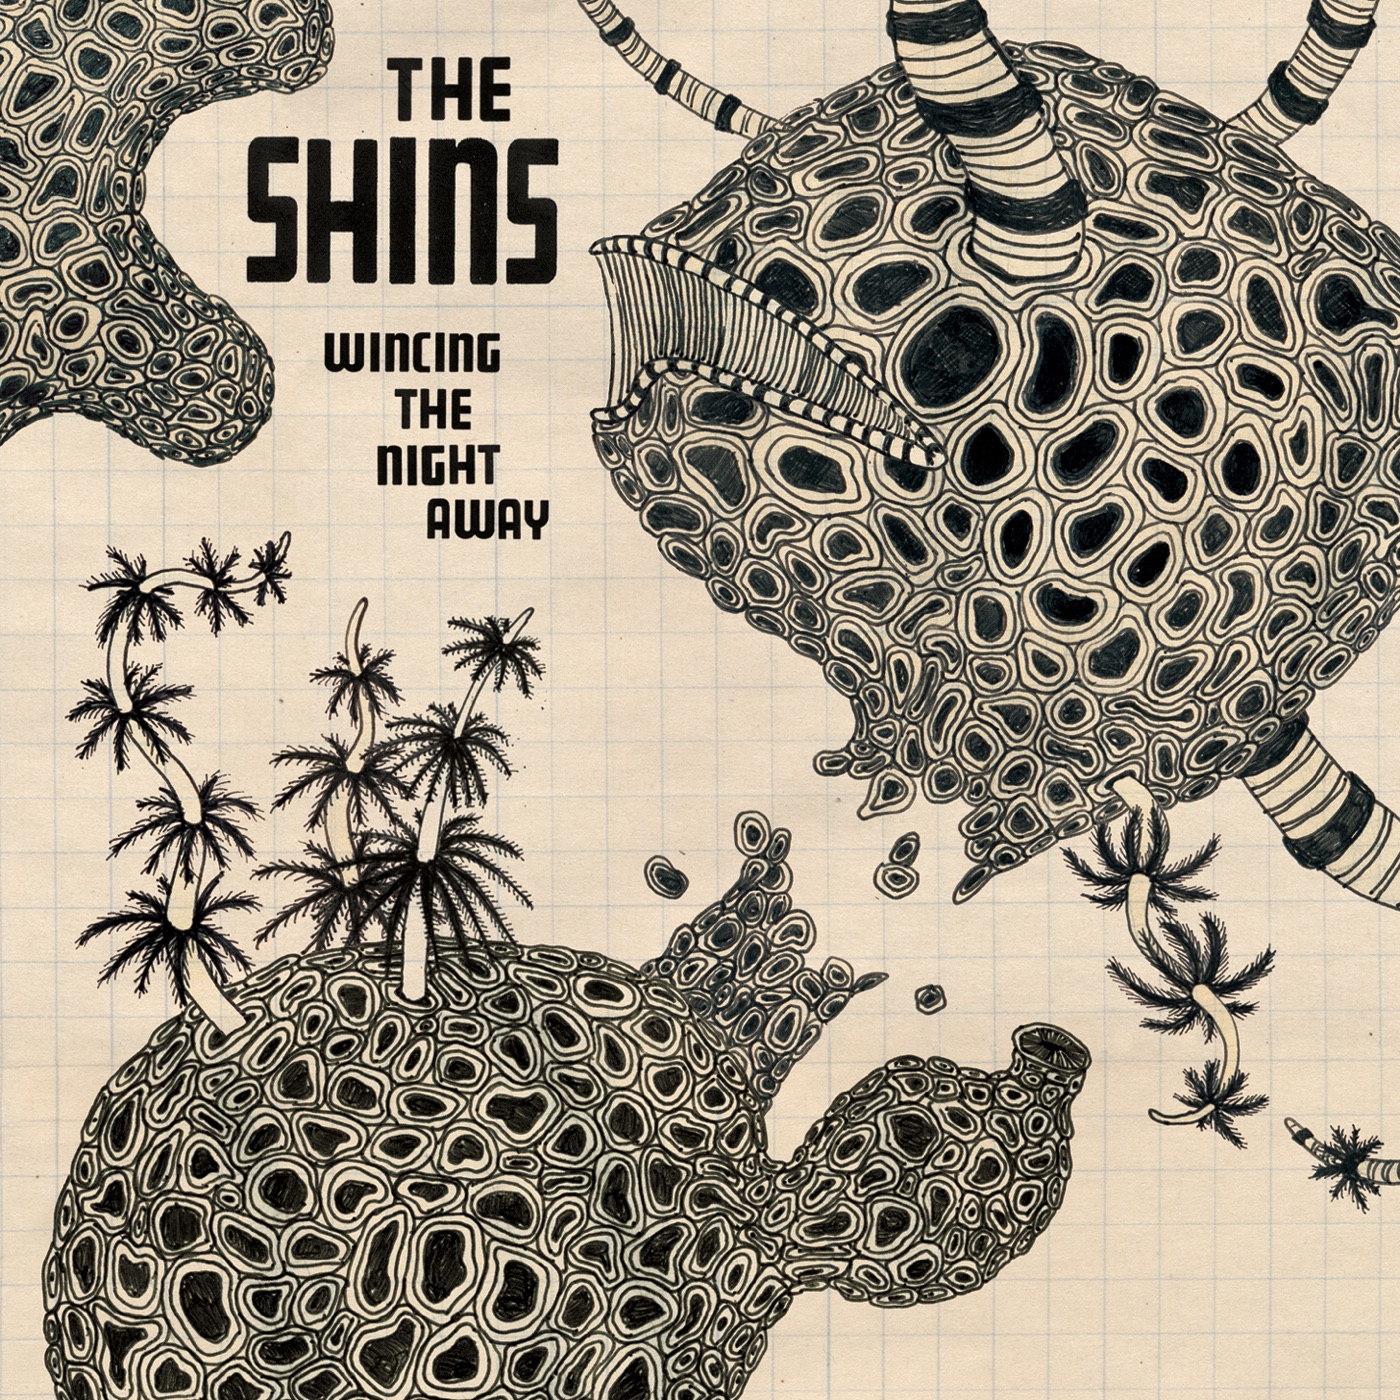 Wincing the Night Away by The Shins